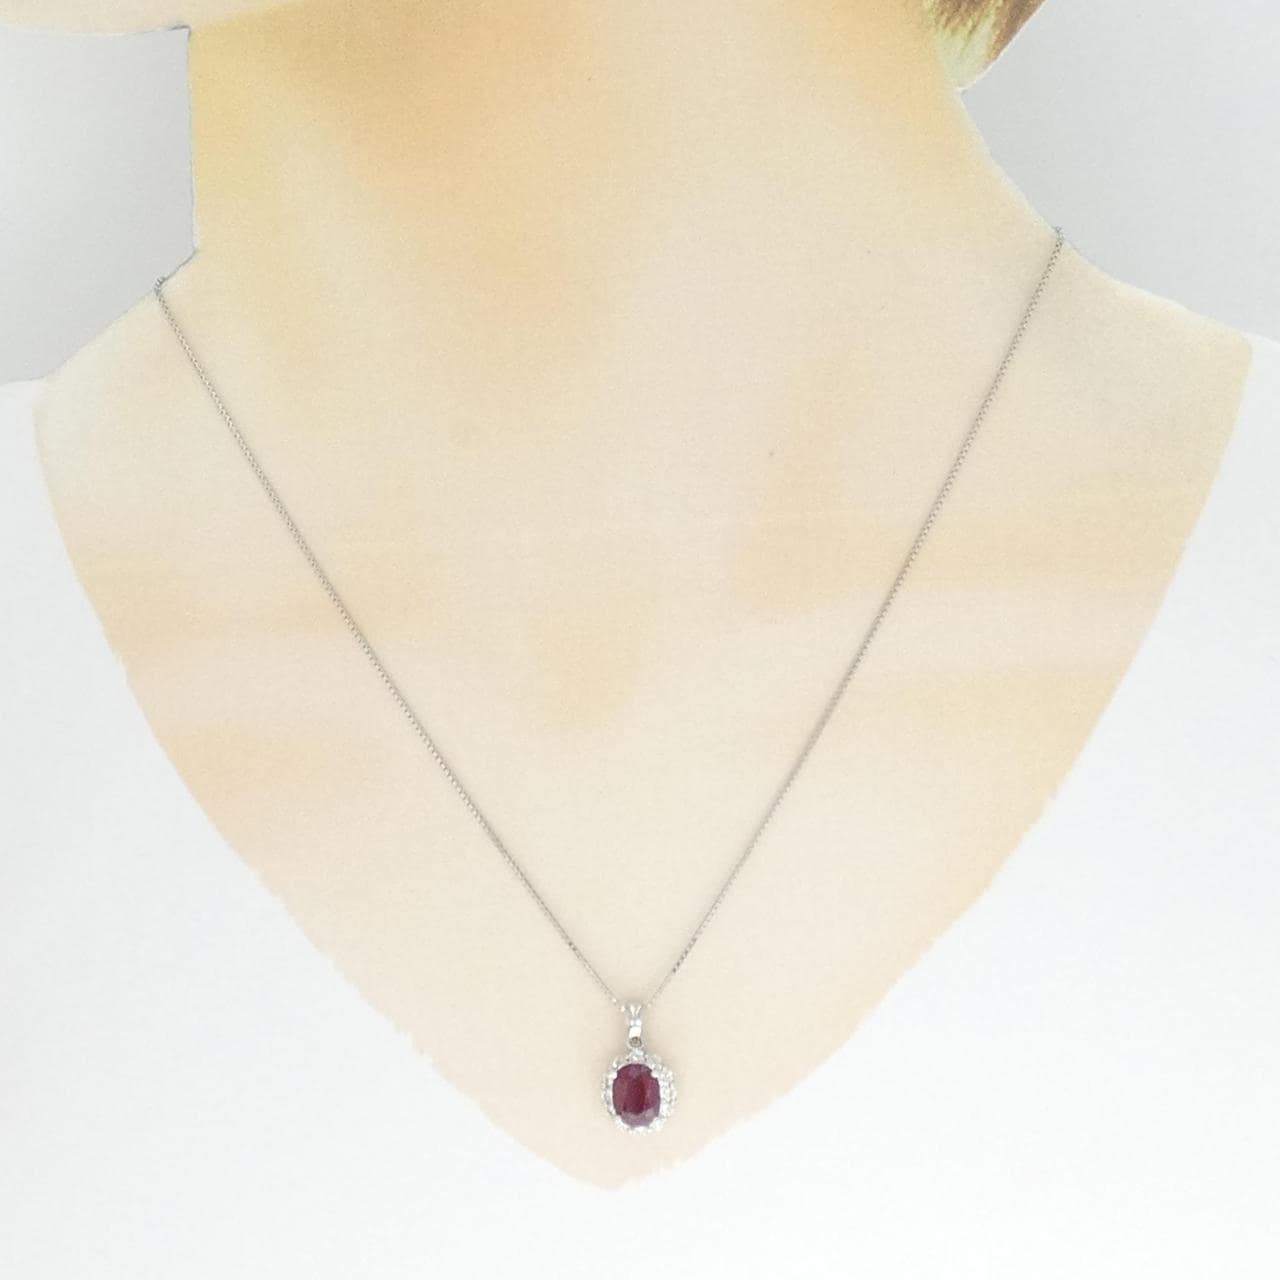 [Remake] PT Ruby Necklace 2.124CT Made in Burma